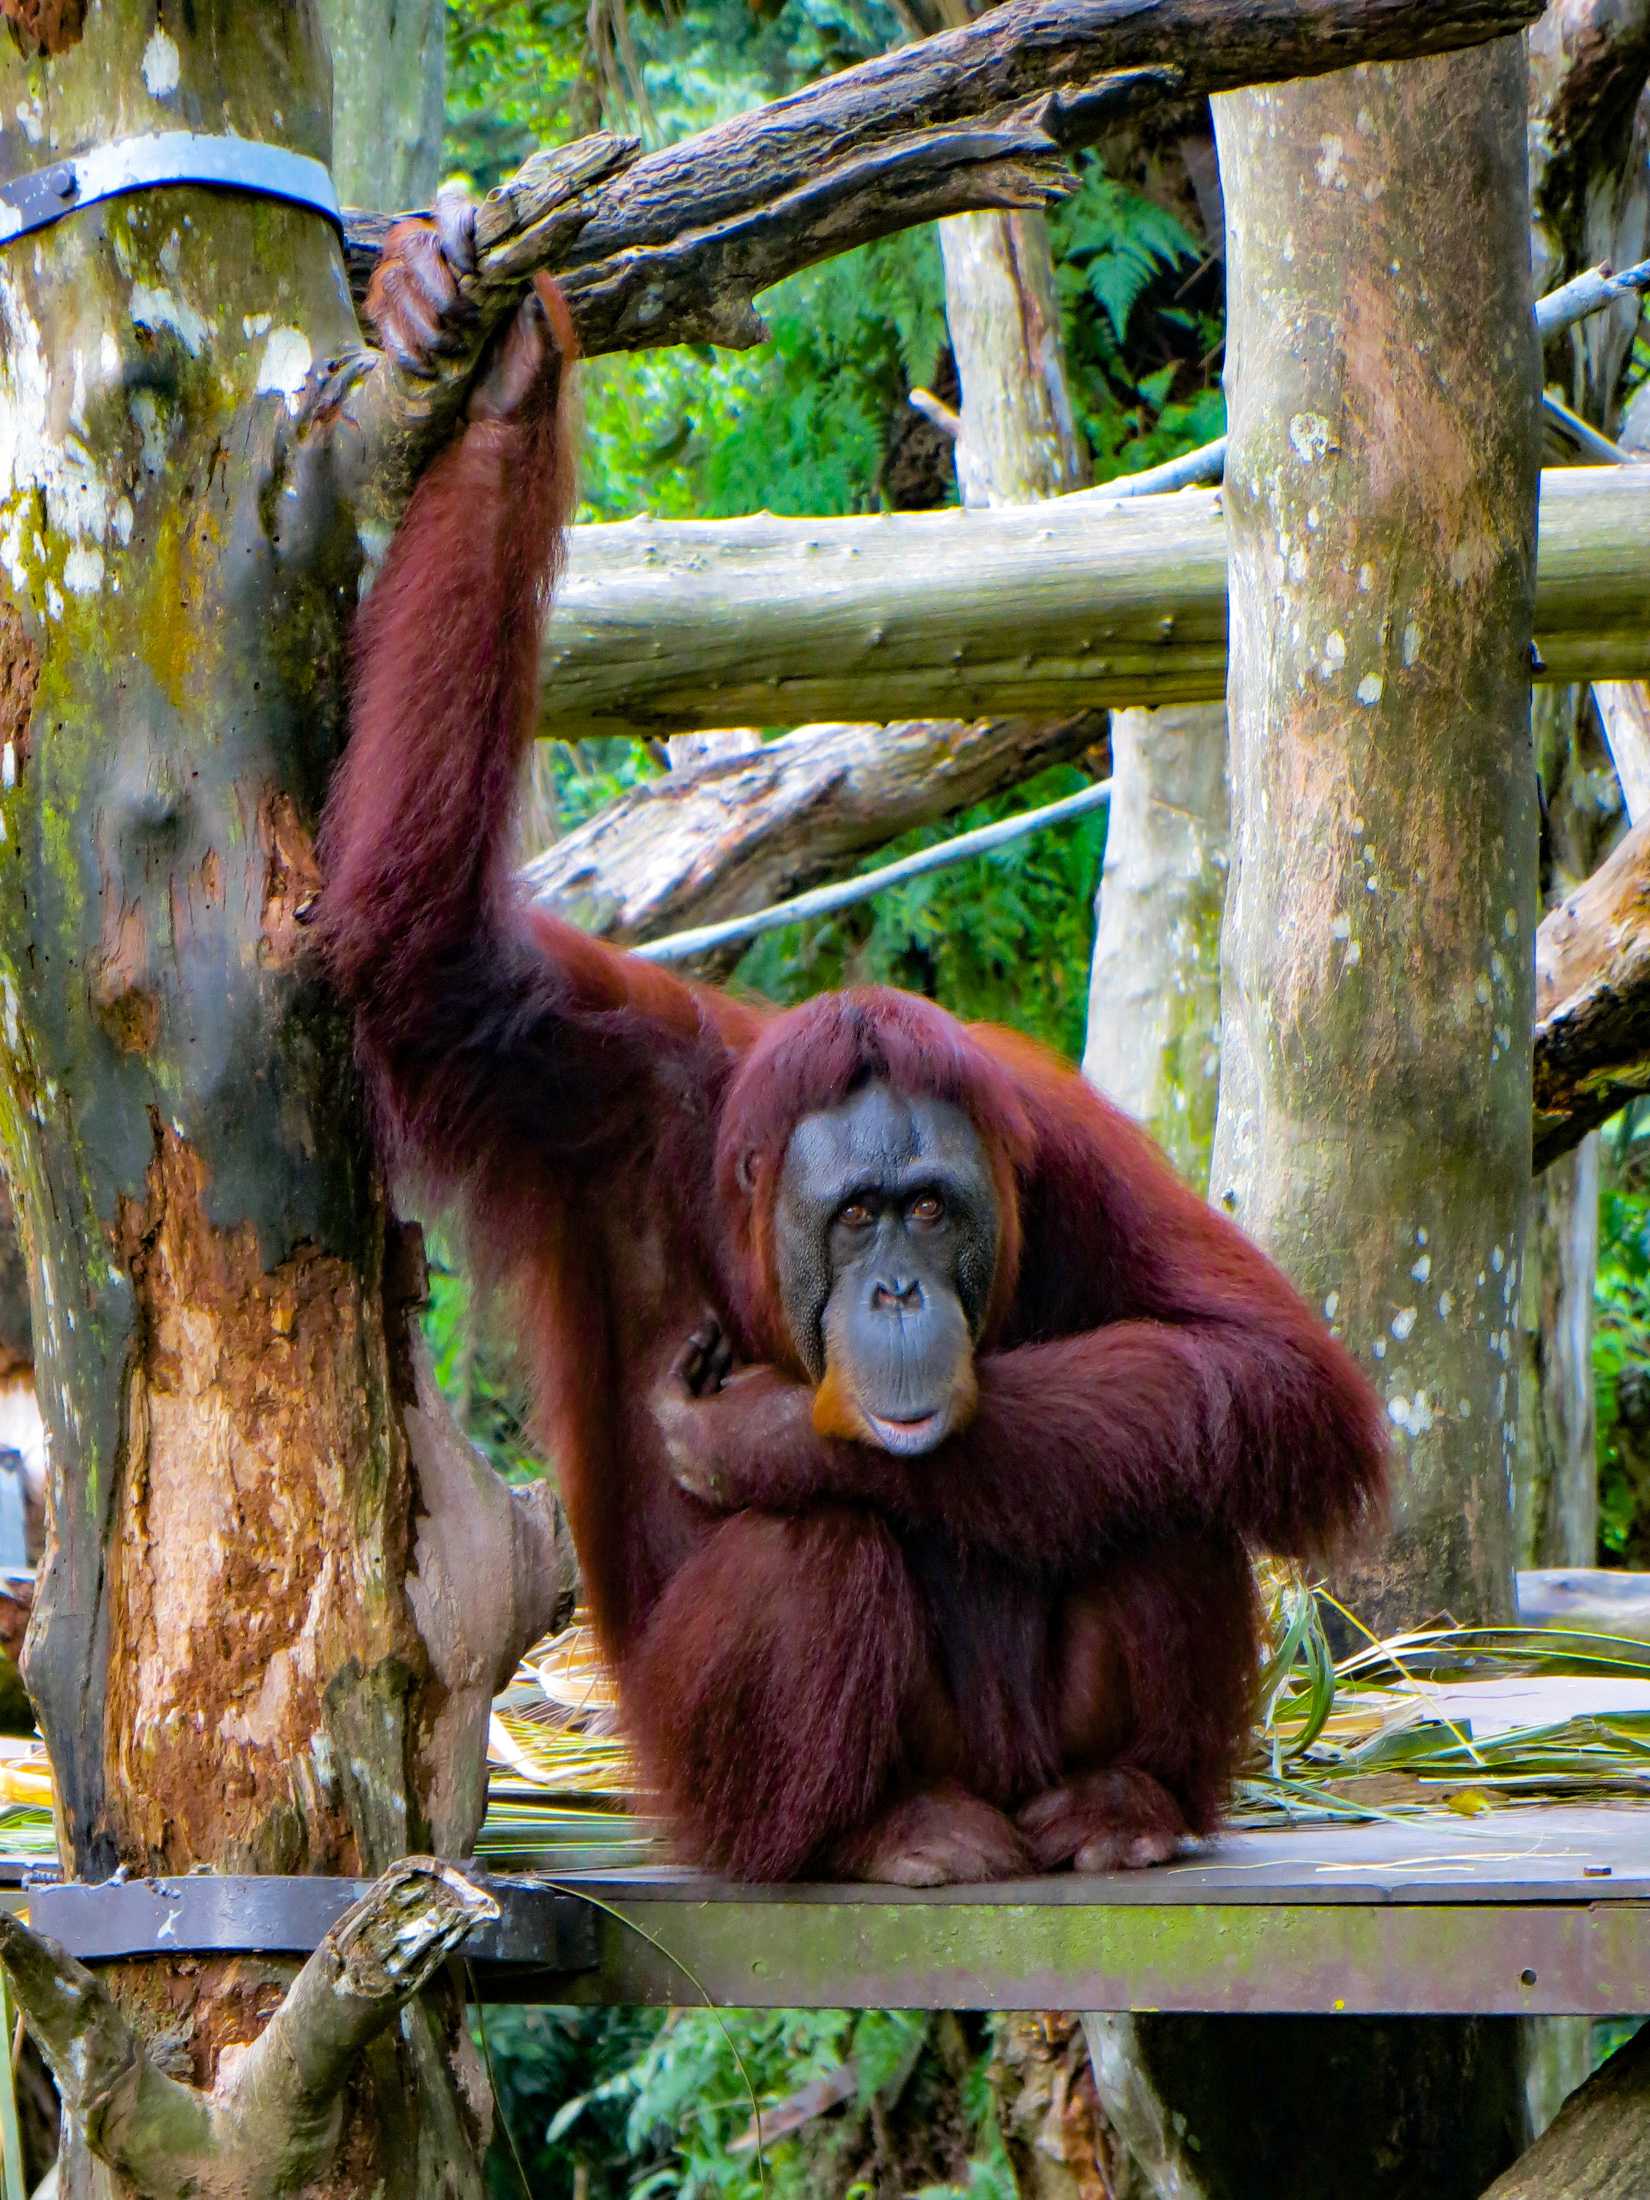 One of the orangutans that Singapore Zoo is so famous for gazes into the distance, whilst holding onto a branch above.